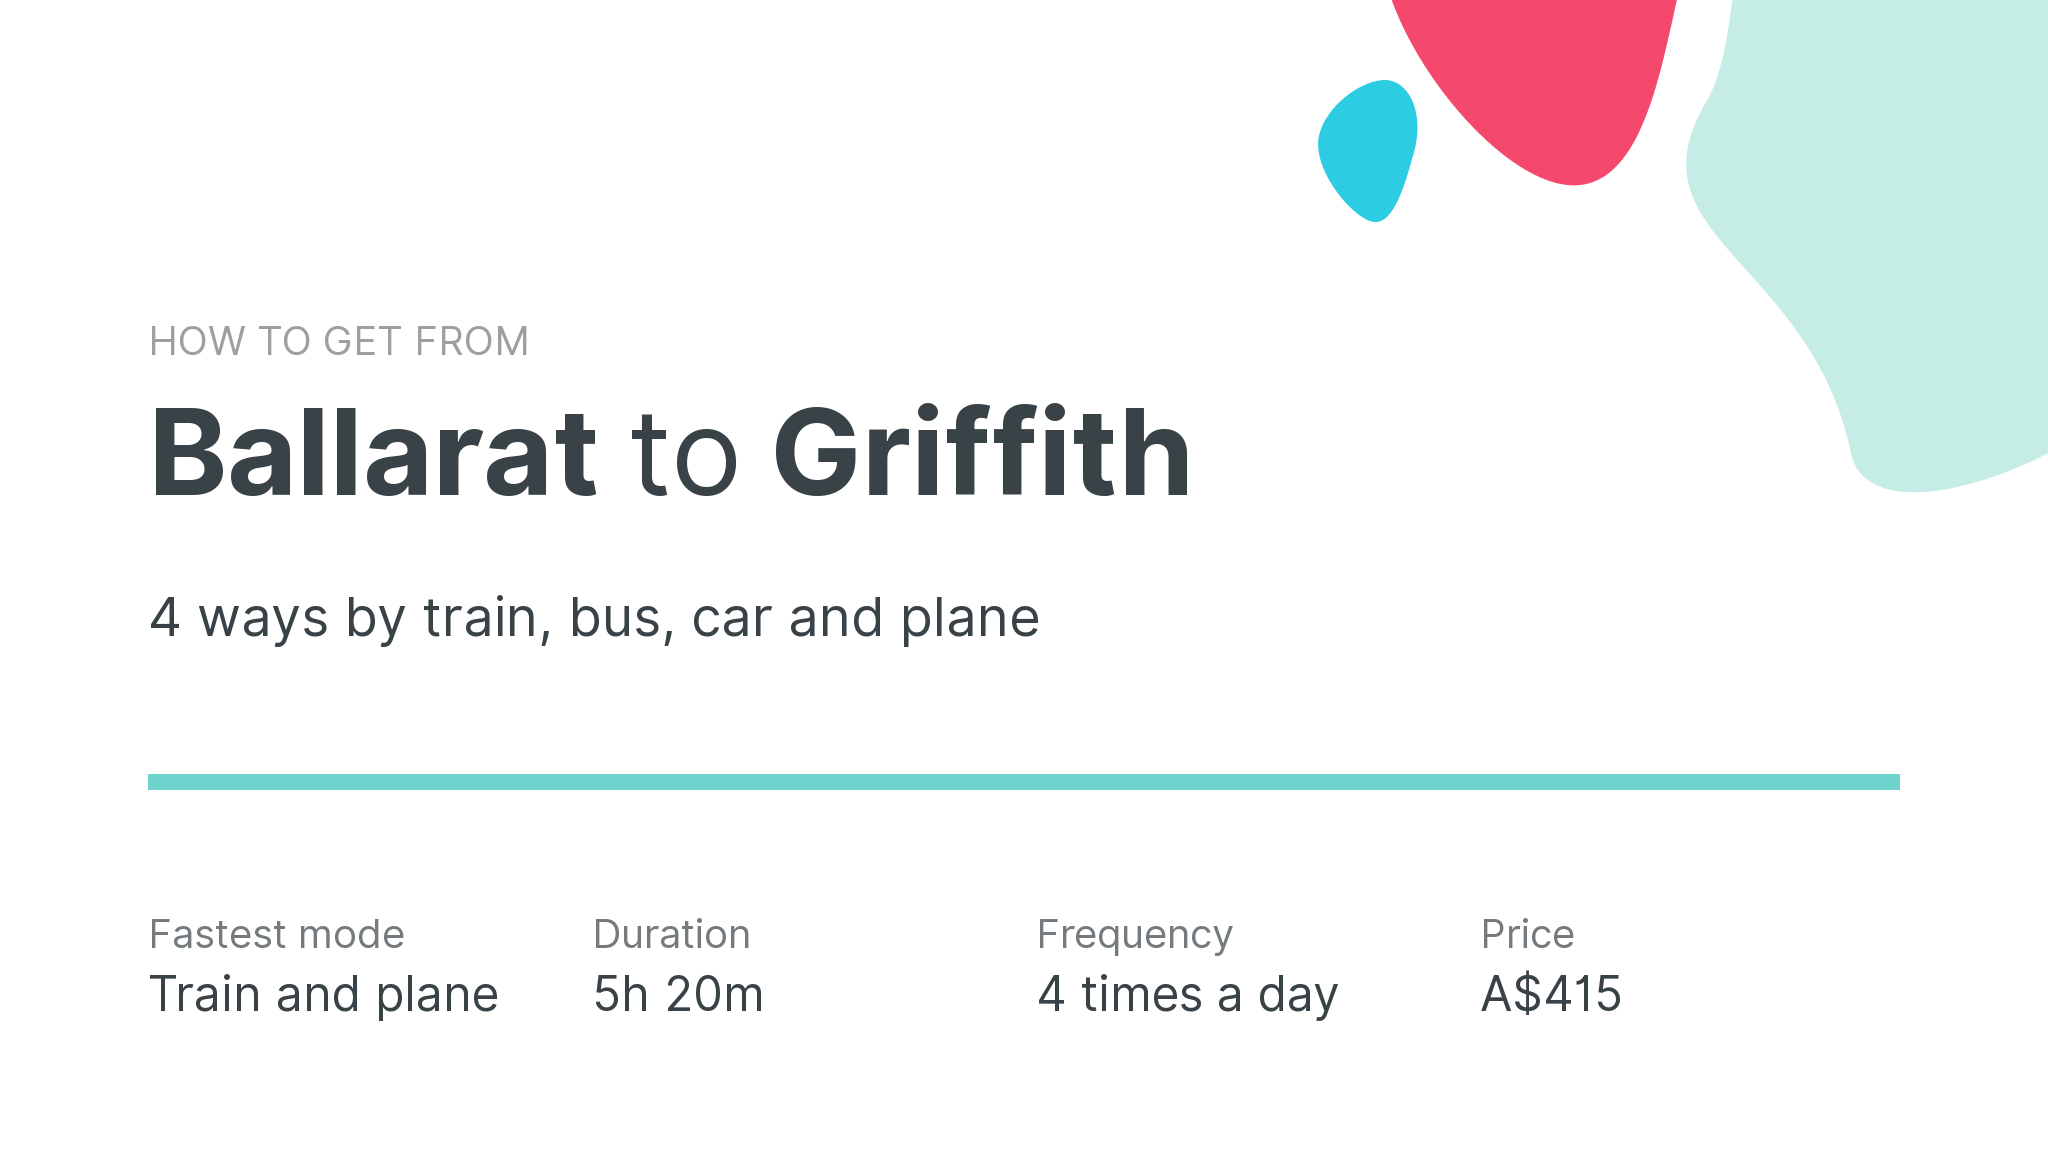 How do I get from Ballarat to Griffith